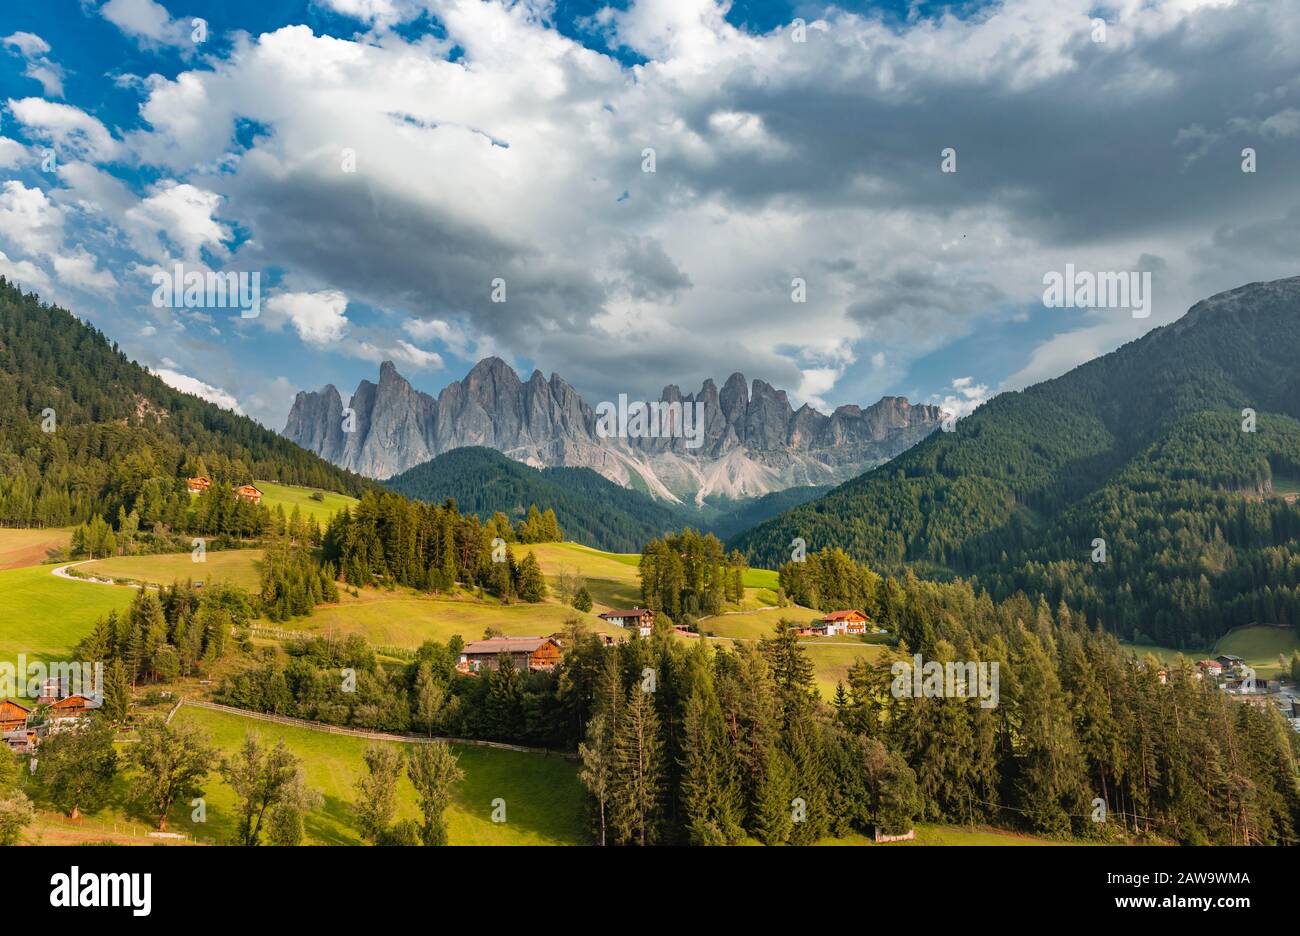 Church of St. Magdalena and Felder, Villnoesstal, in the back Geislergruppe with Sass Rigais, St. Magdalena, Bozen, South Tyrol, Italy Stock Photo